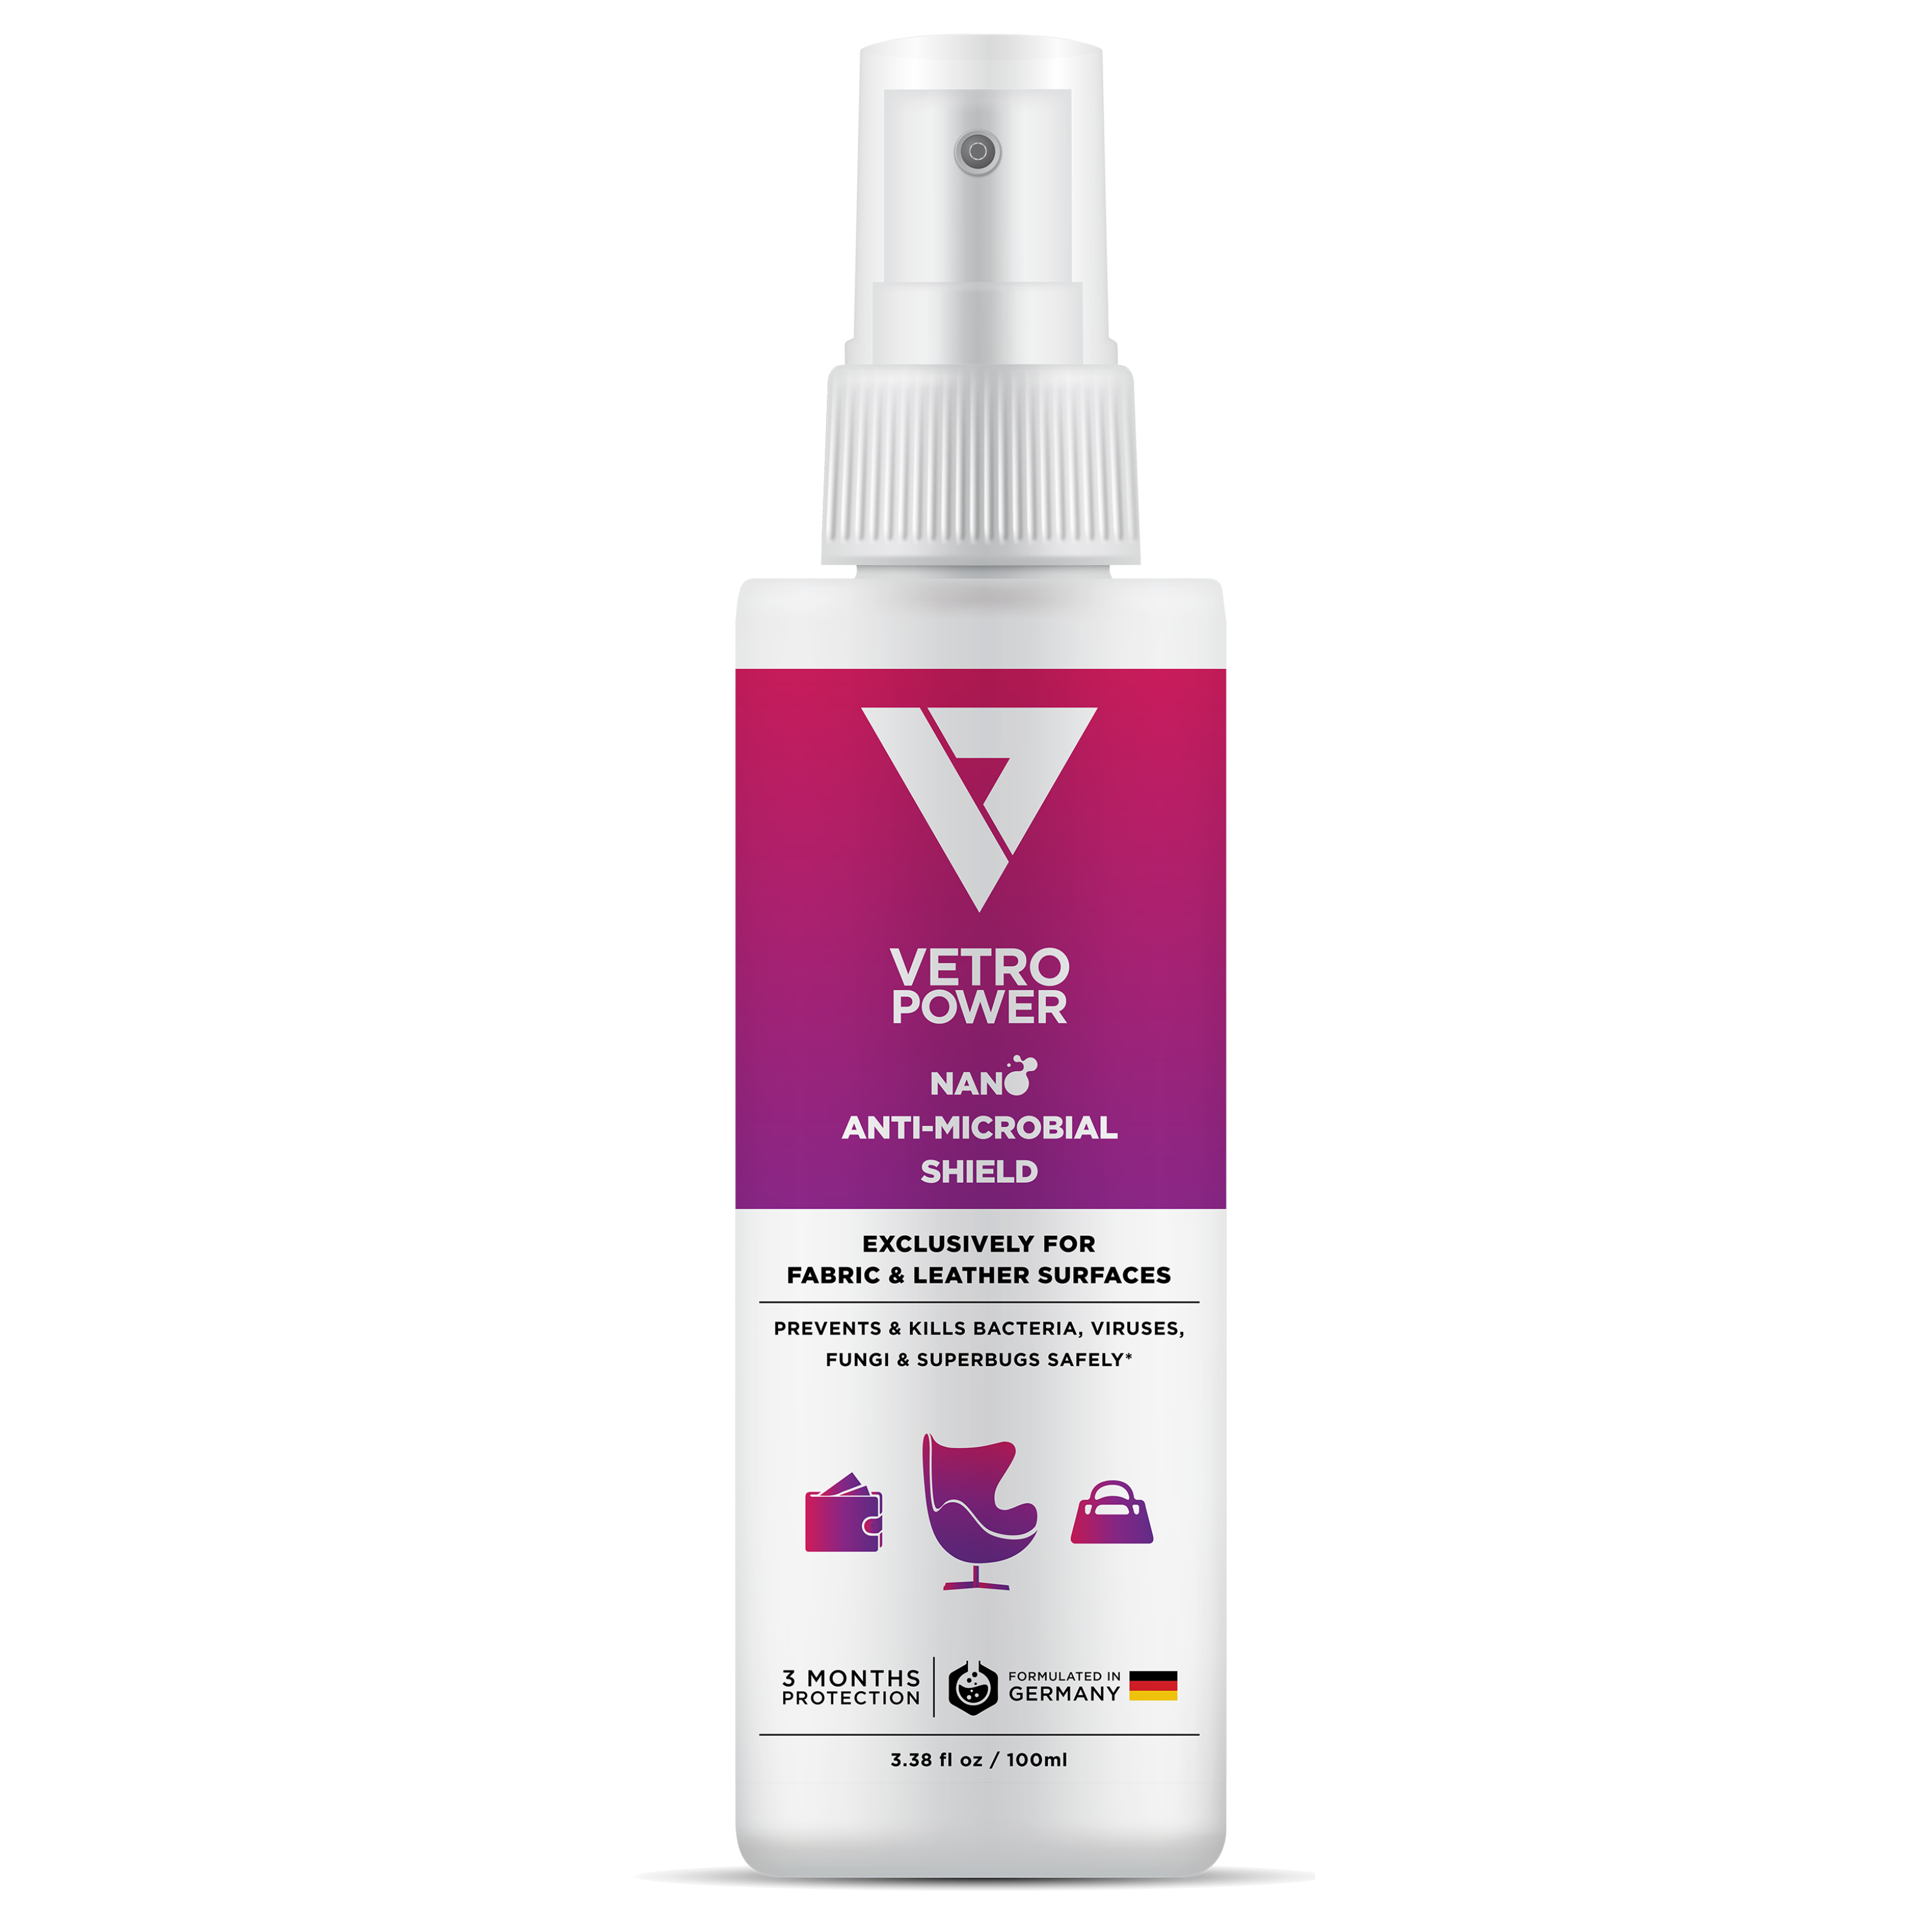 Vetro Power Nano Anti-Microbial Shield for Fabric & Leather Surfaces 100ml